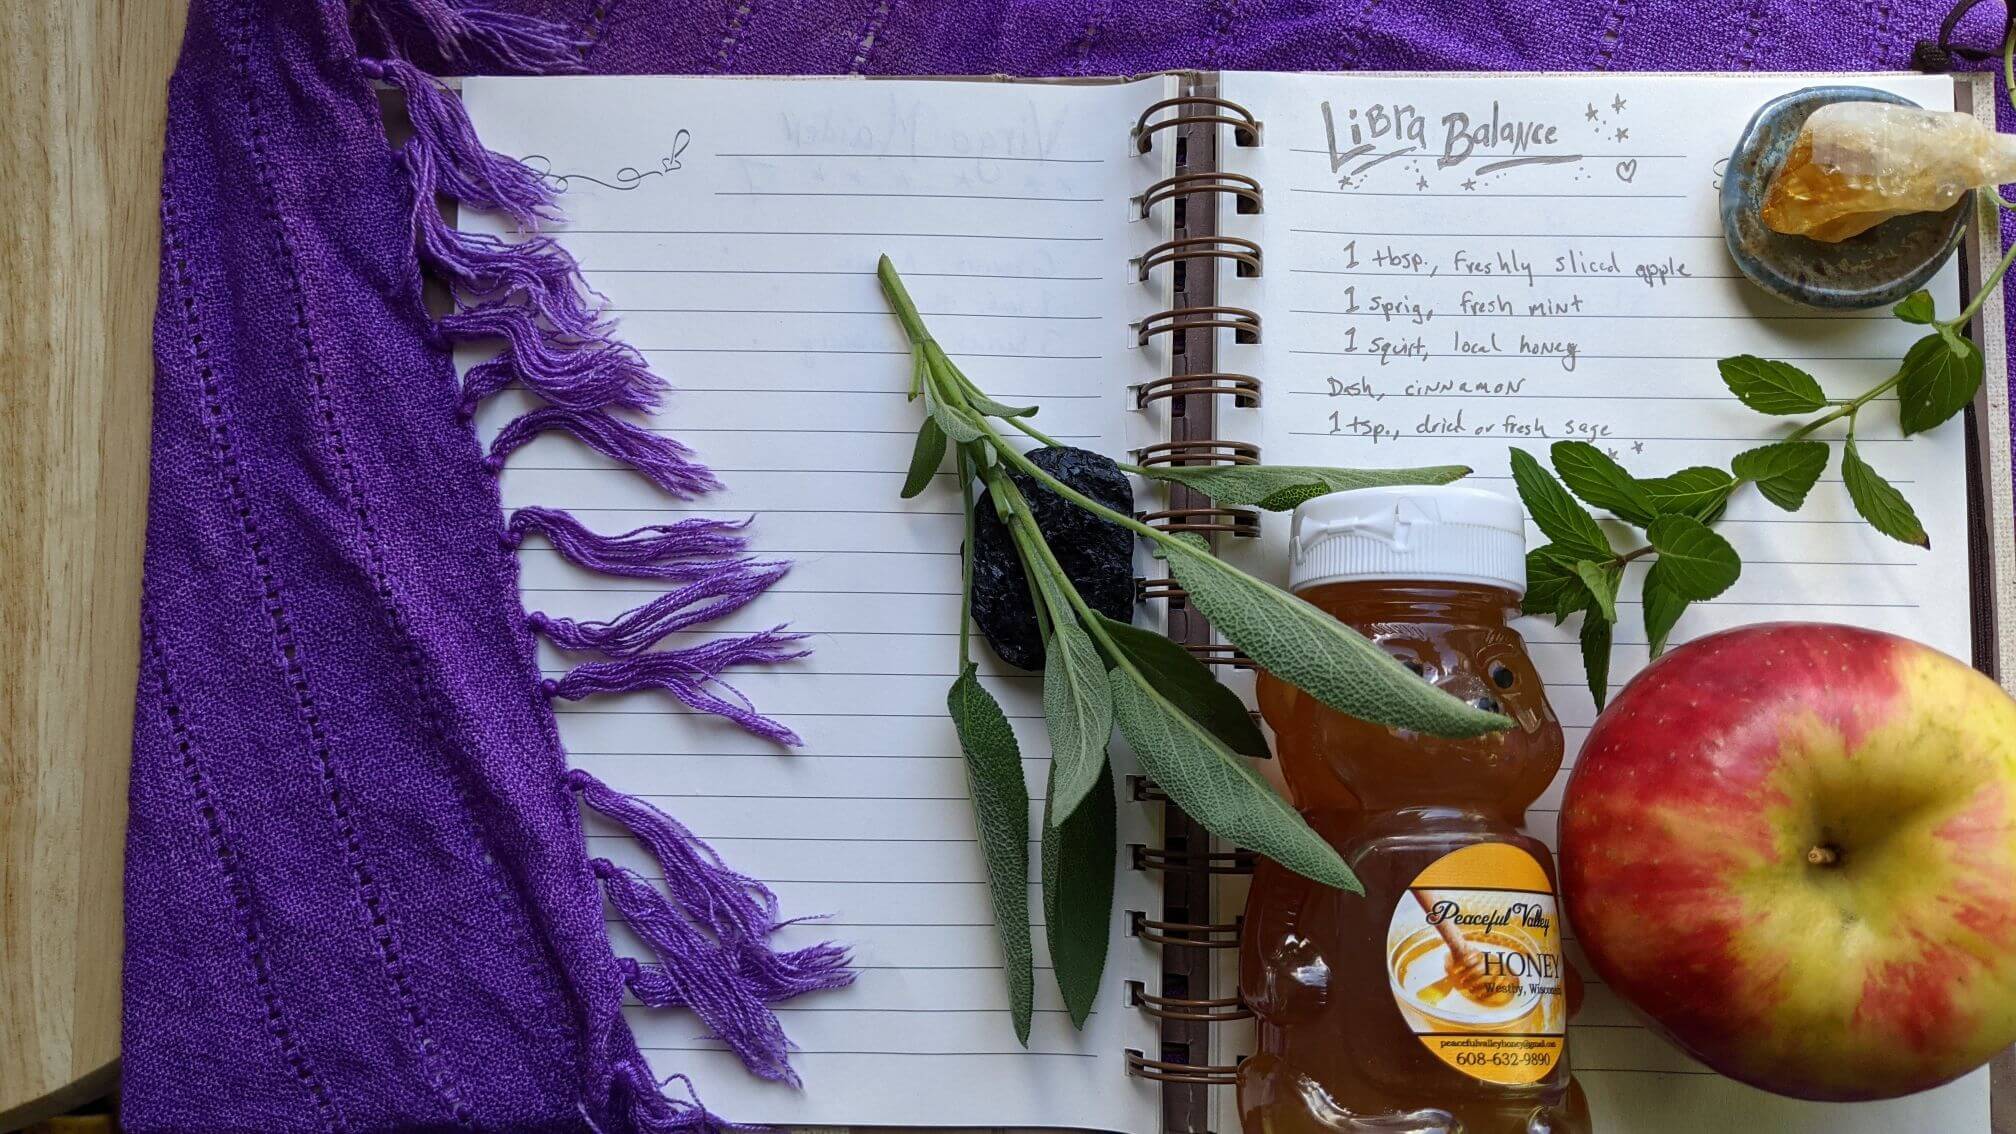 The handwritten recipe is displayed in an open notebook adorned with fresh sage and a bear-shaped jar of honey.